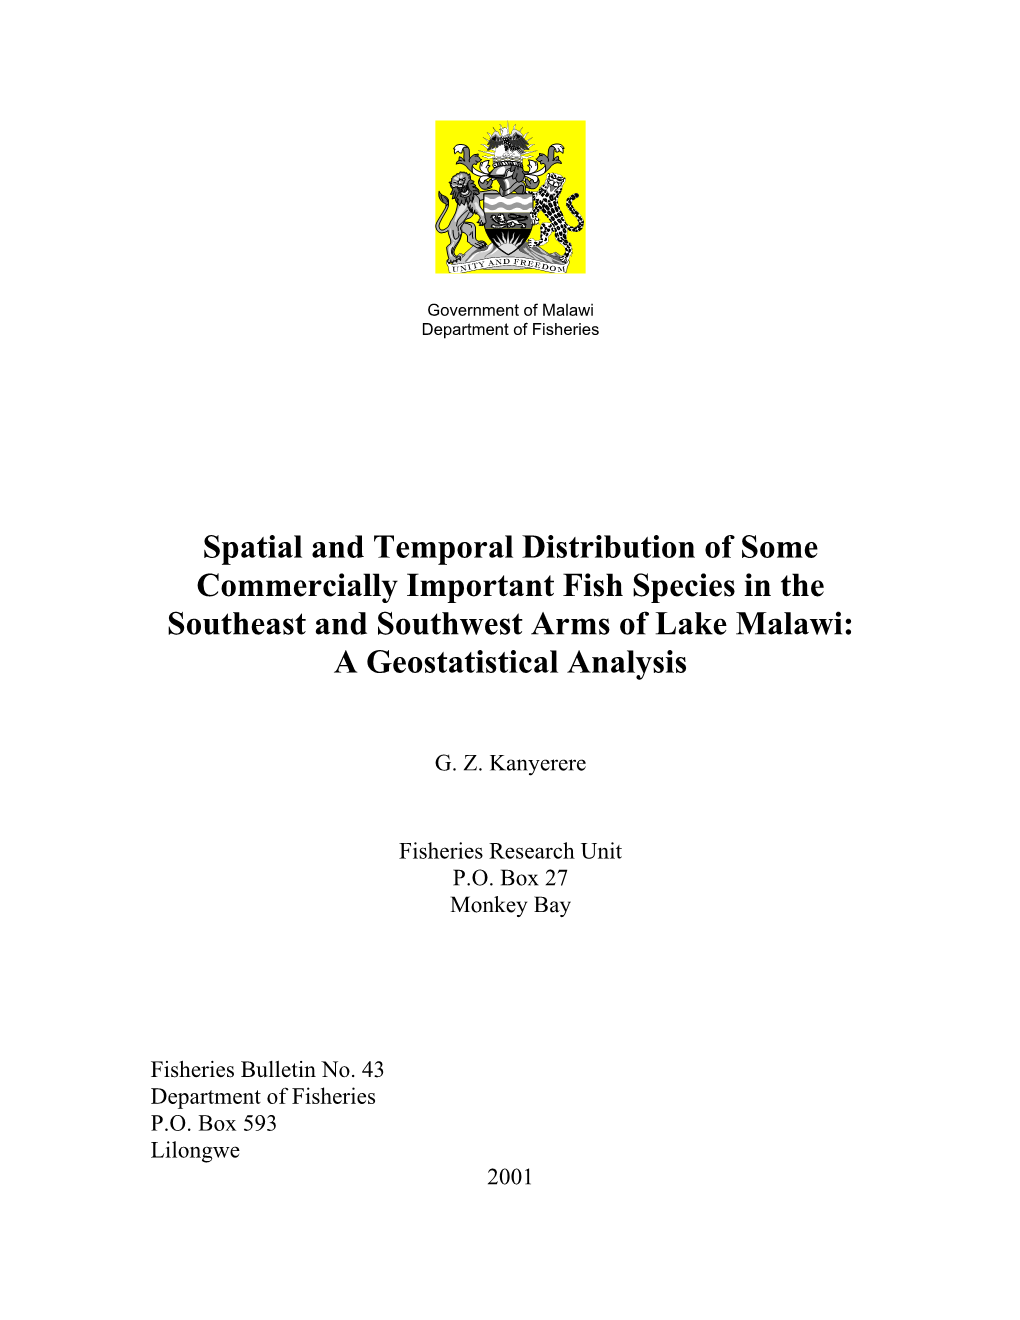 Spatial and Temporal Distribution of Some Commercially Important Fish Species in the South East and South West Arms of Lake